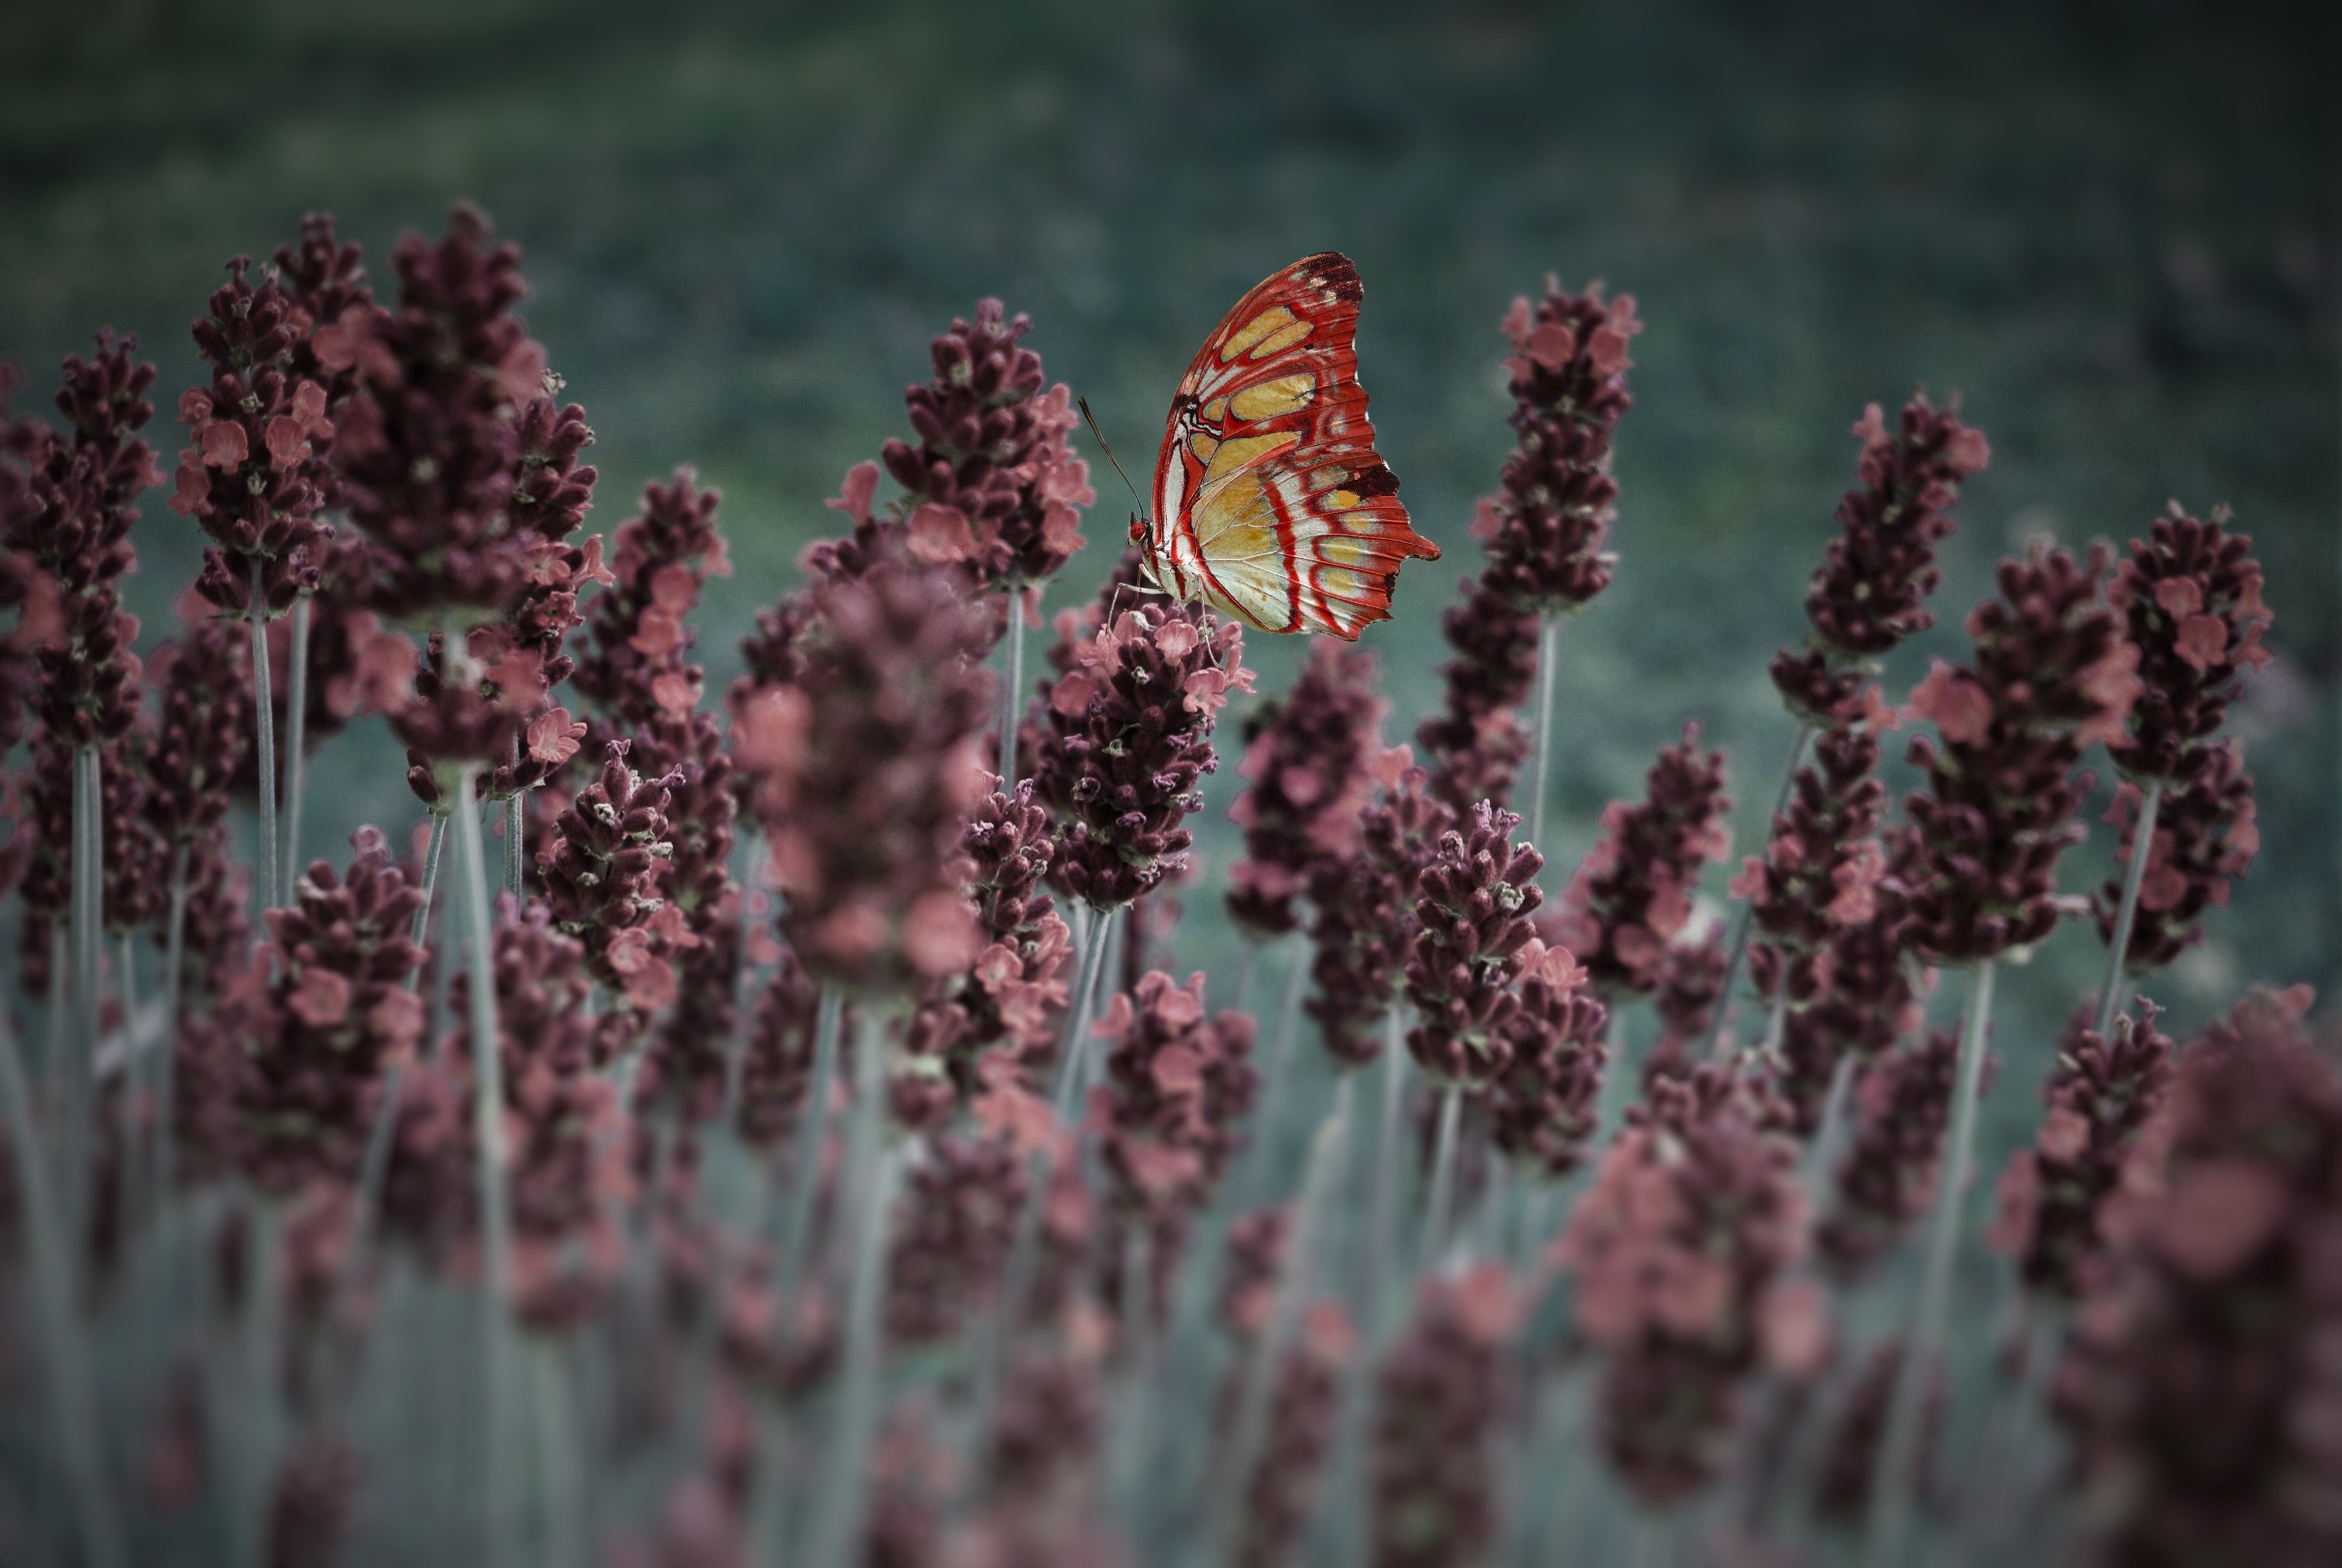 Red and Yellow Butterfly, Garden, Summer, Plants, Outdoors, HQ Photo